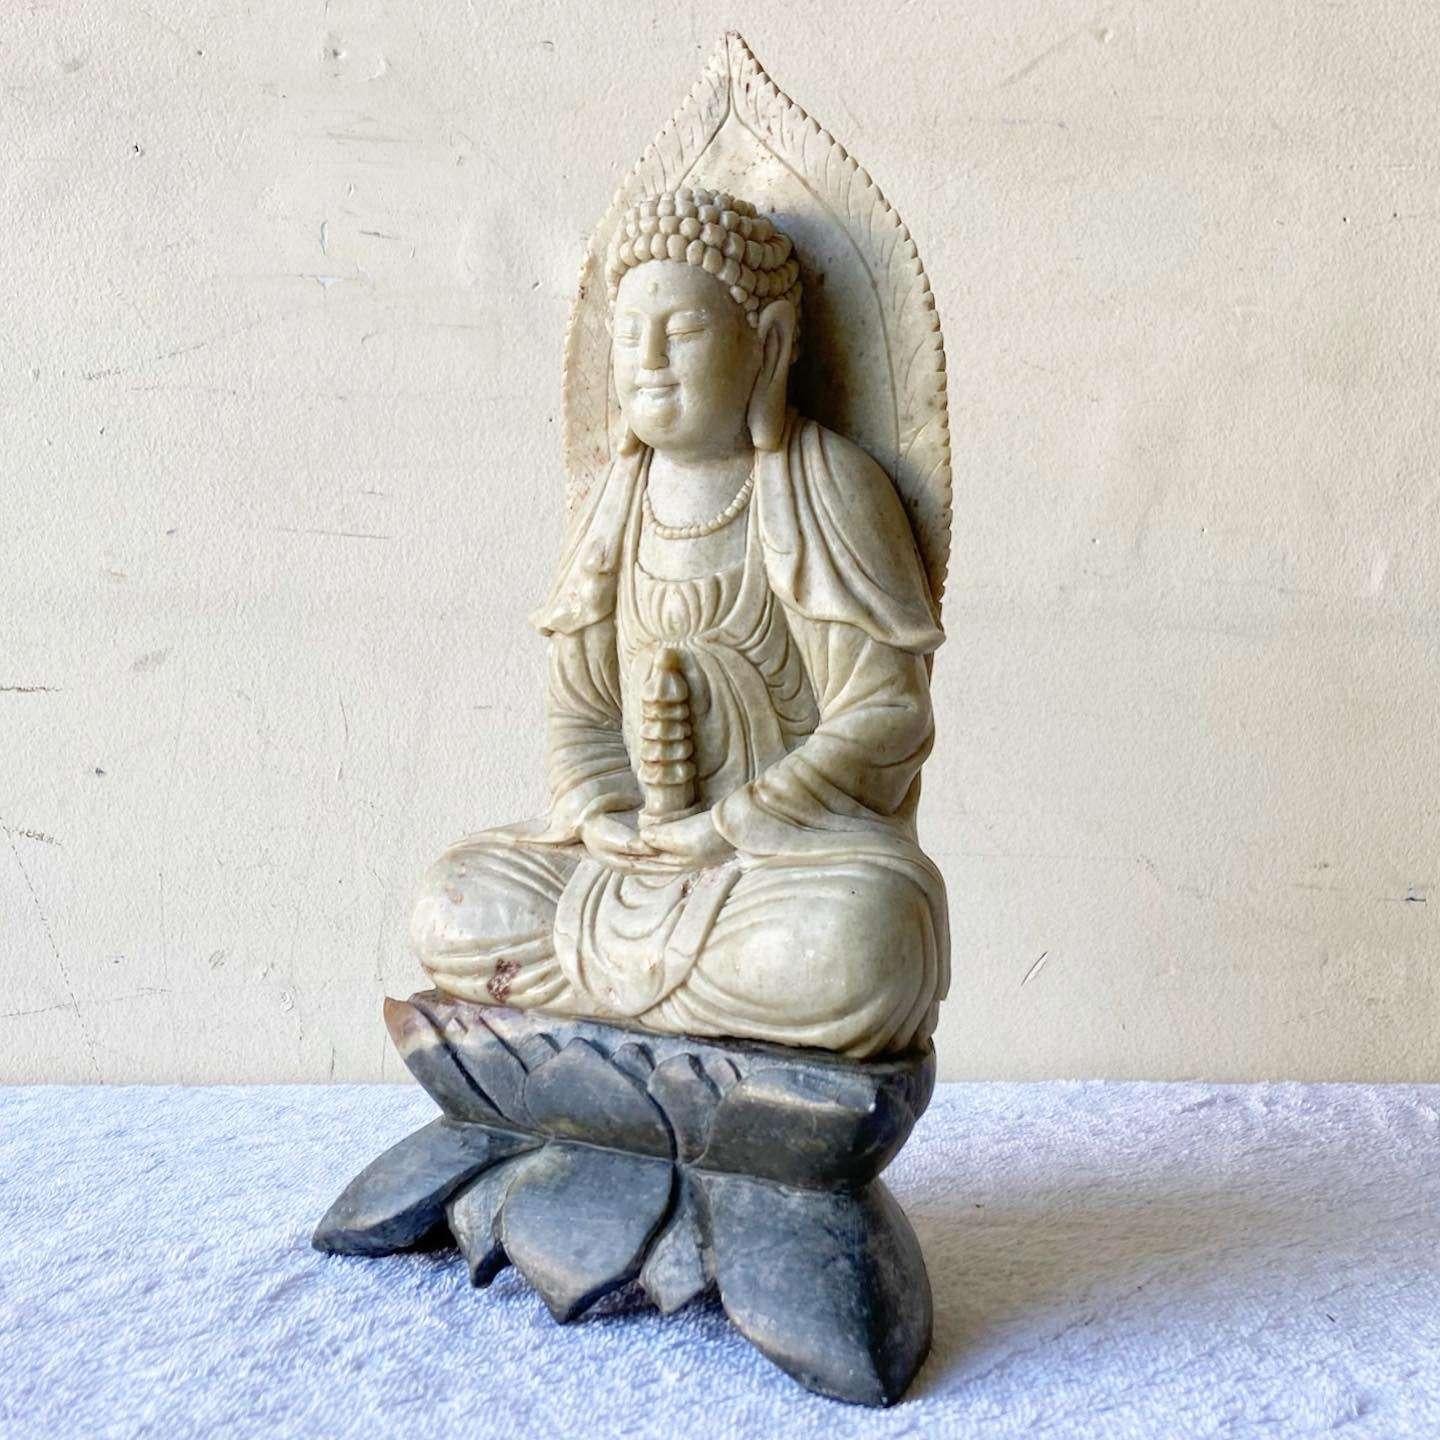 Exceptional vintage hand carved stone chinese Buddha.
